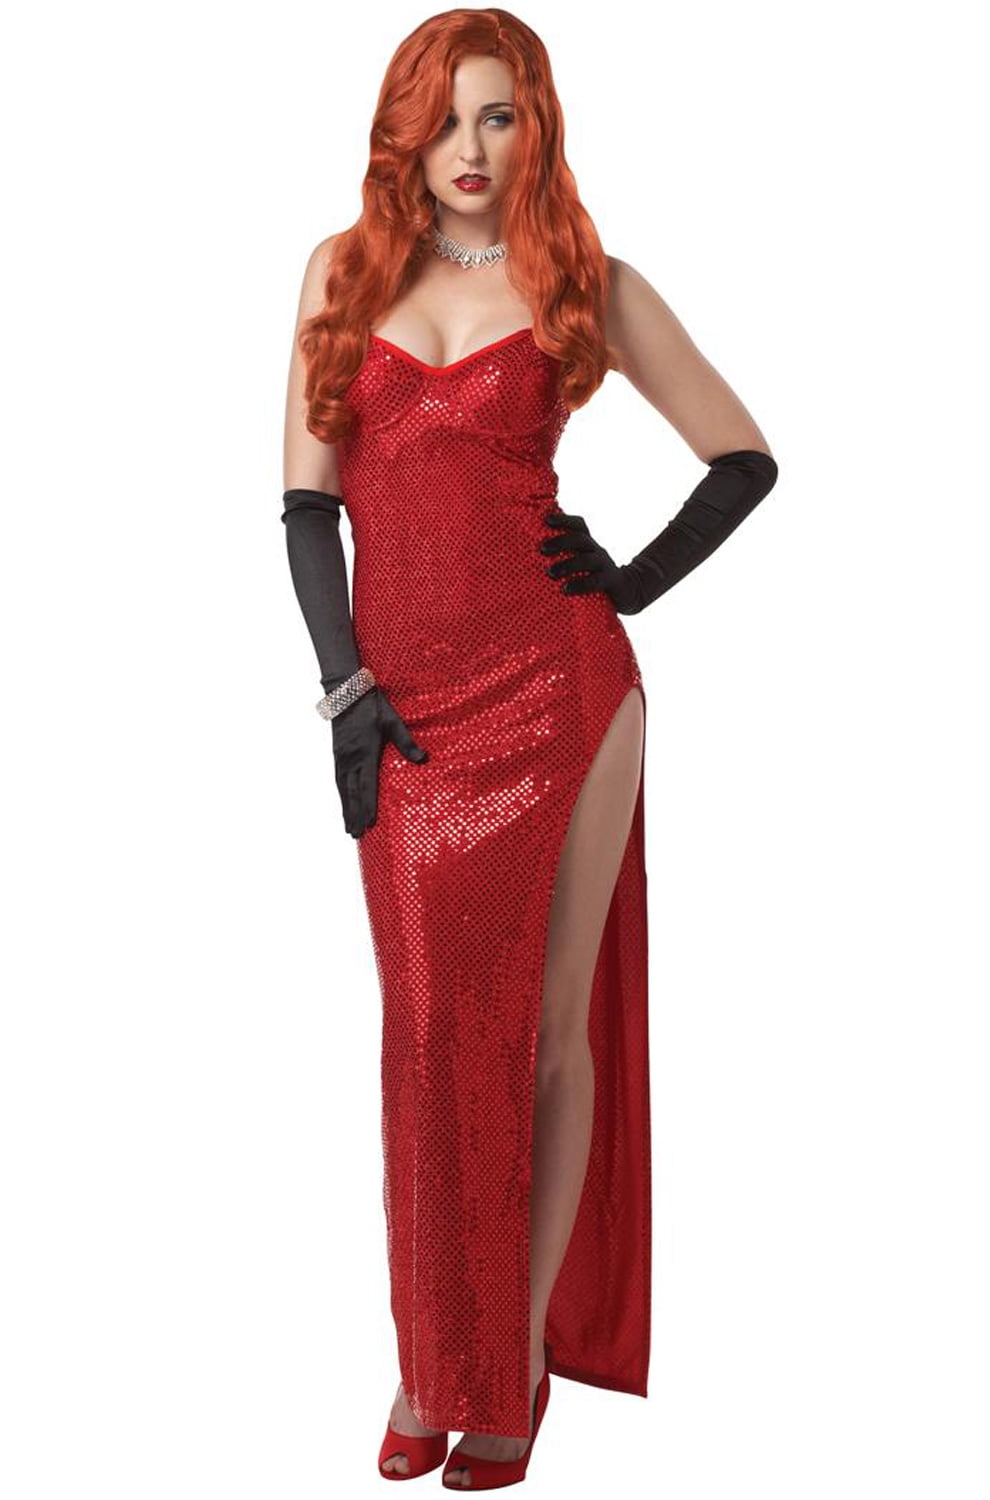 dan backman recommends sexy jessica rabbit cosplay pic